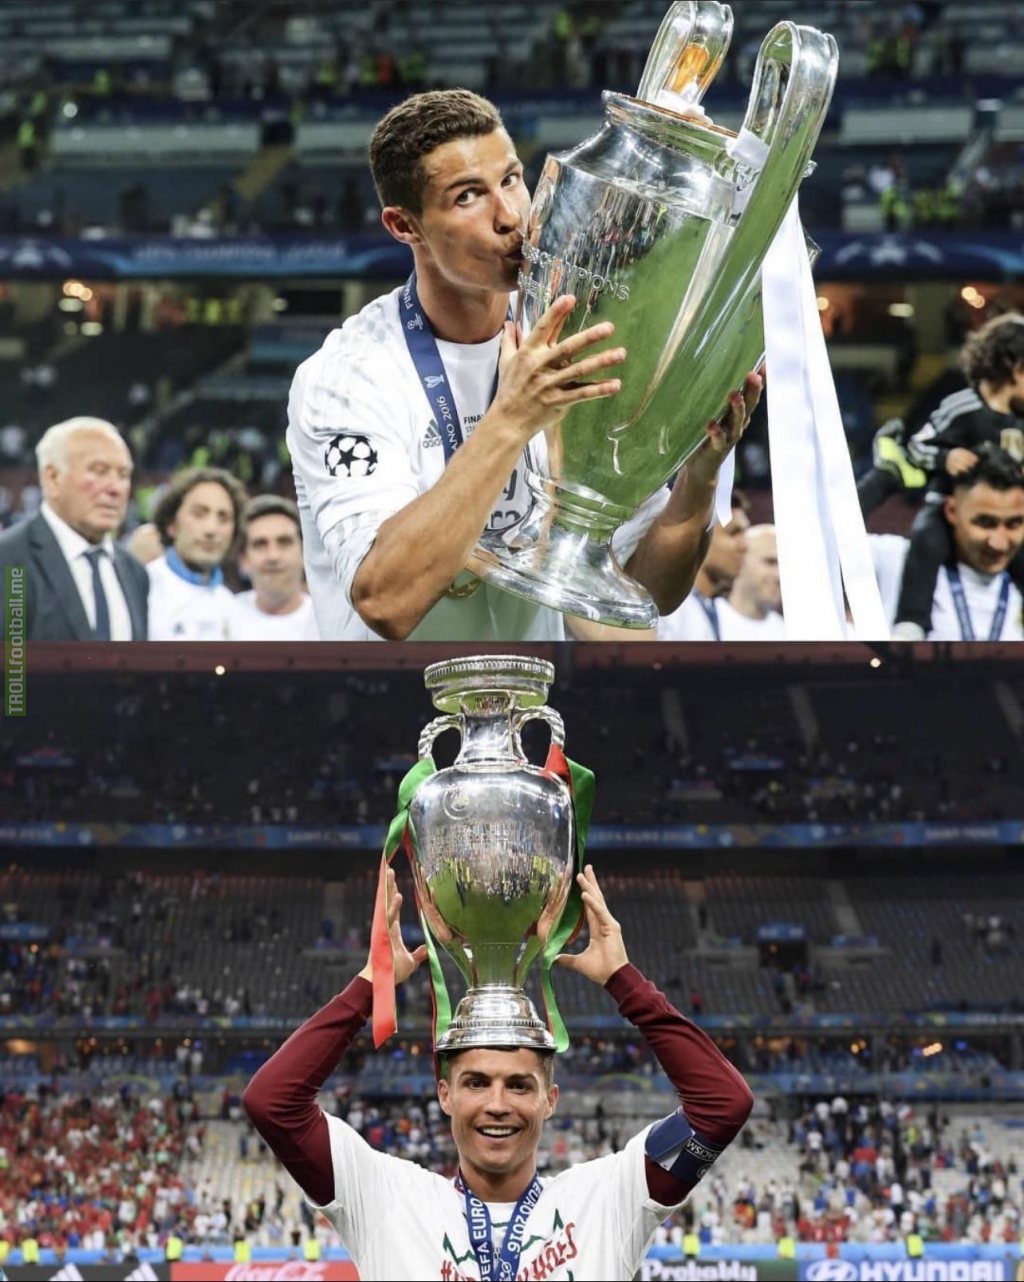 On this day in 2016: Cristiano Ronaldo became the first footballer to be recognized as European Sportsperson of the year, in the 59 years since the award was introduced. This honor is awarded on the basis of a vote of 27 European news agencies. In 2016, CR7 won the EURO and Champions League.